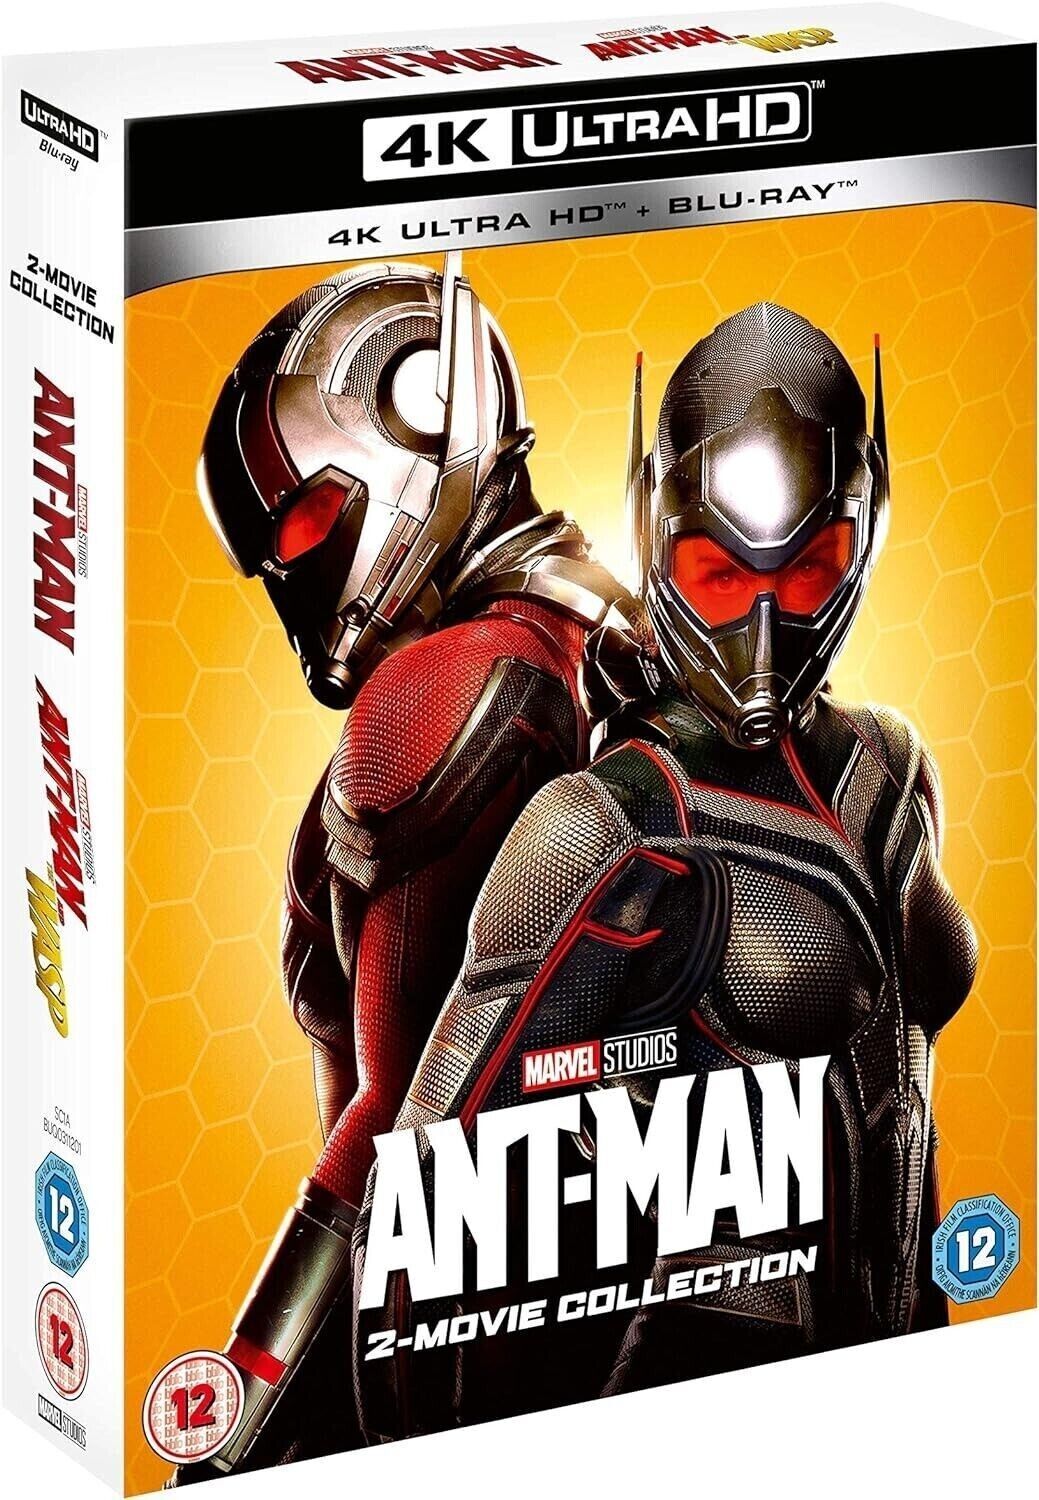 Primary image for Ant-Man : 2-Movie Collection 4K UHD + Blu-ray Box codefree